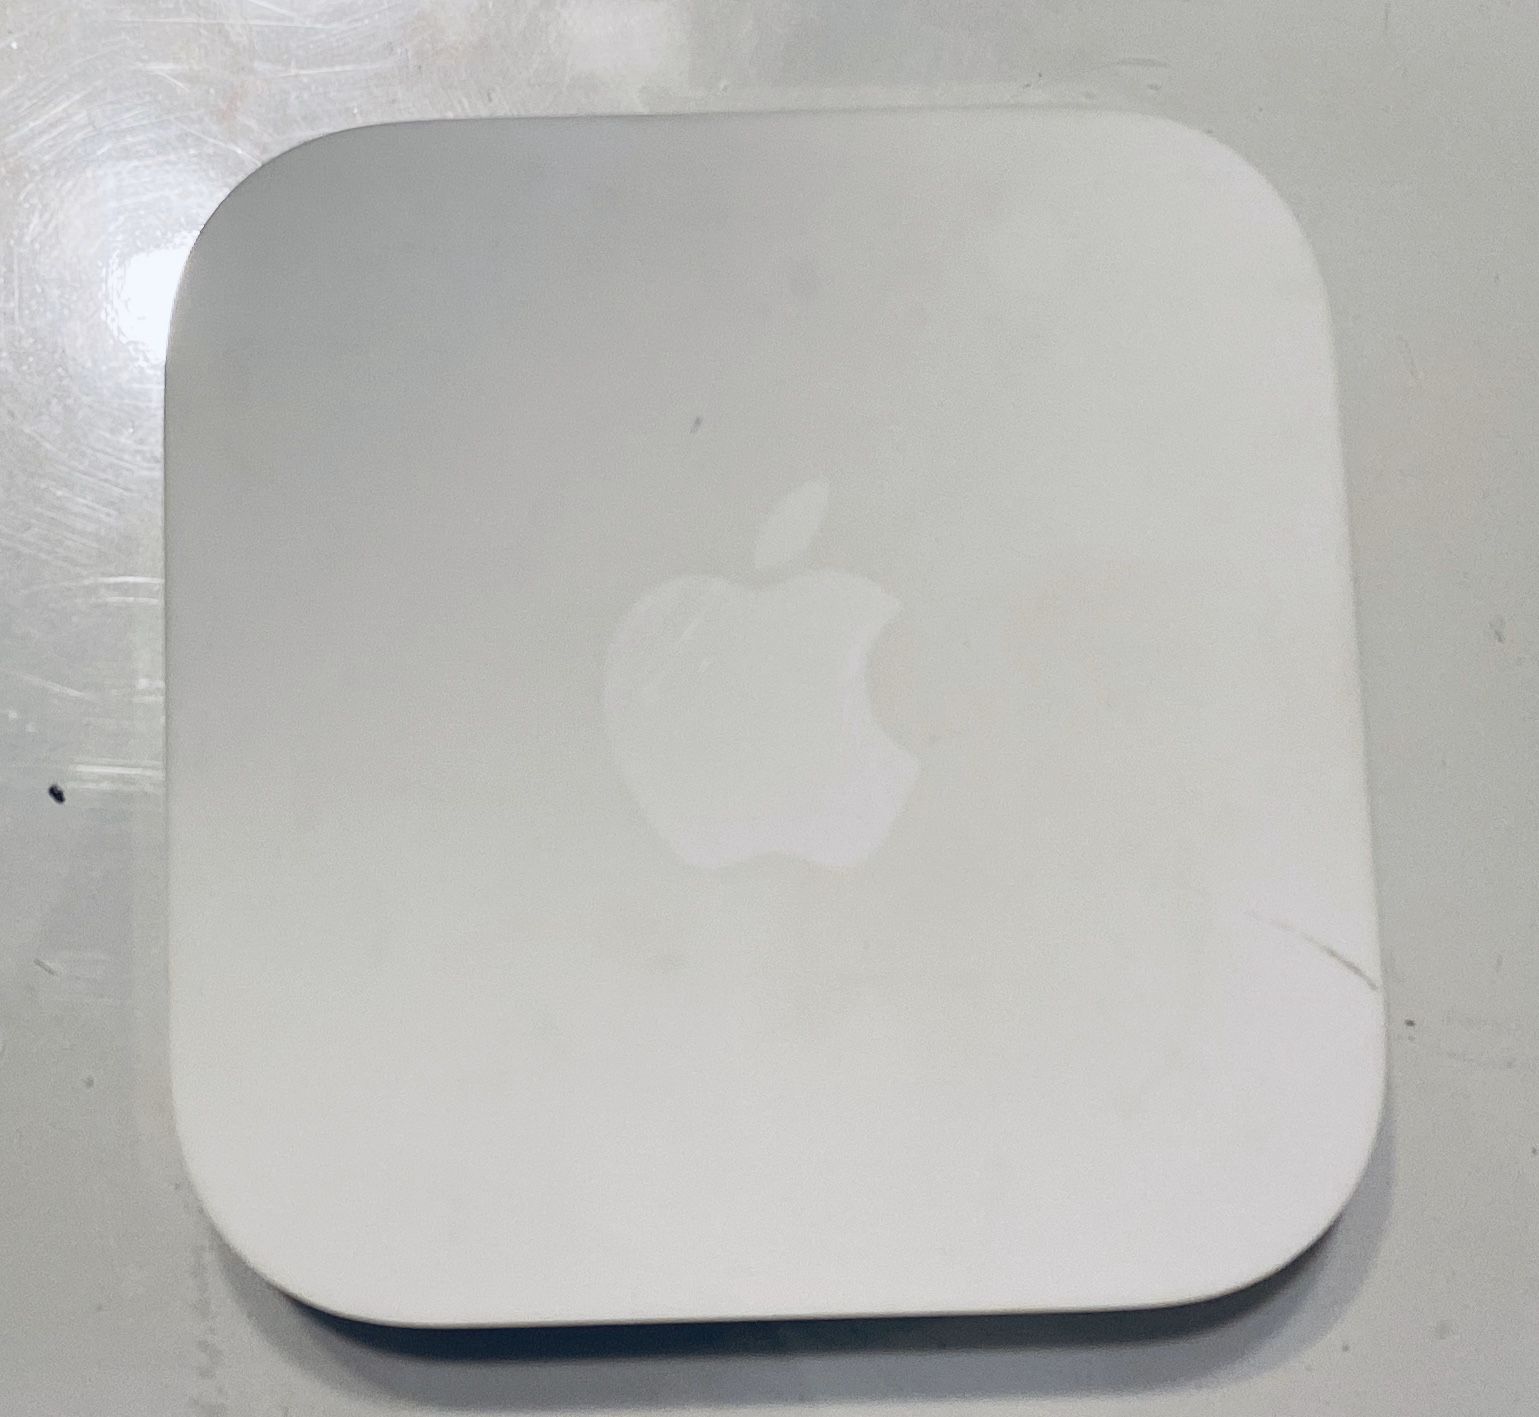 Apple Airport Express Base Station, Wireless Router, Excellent condition